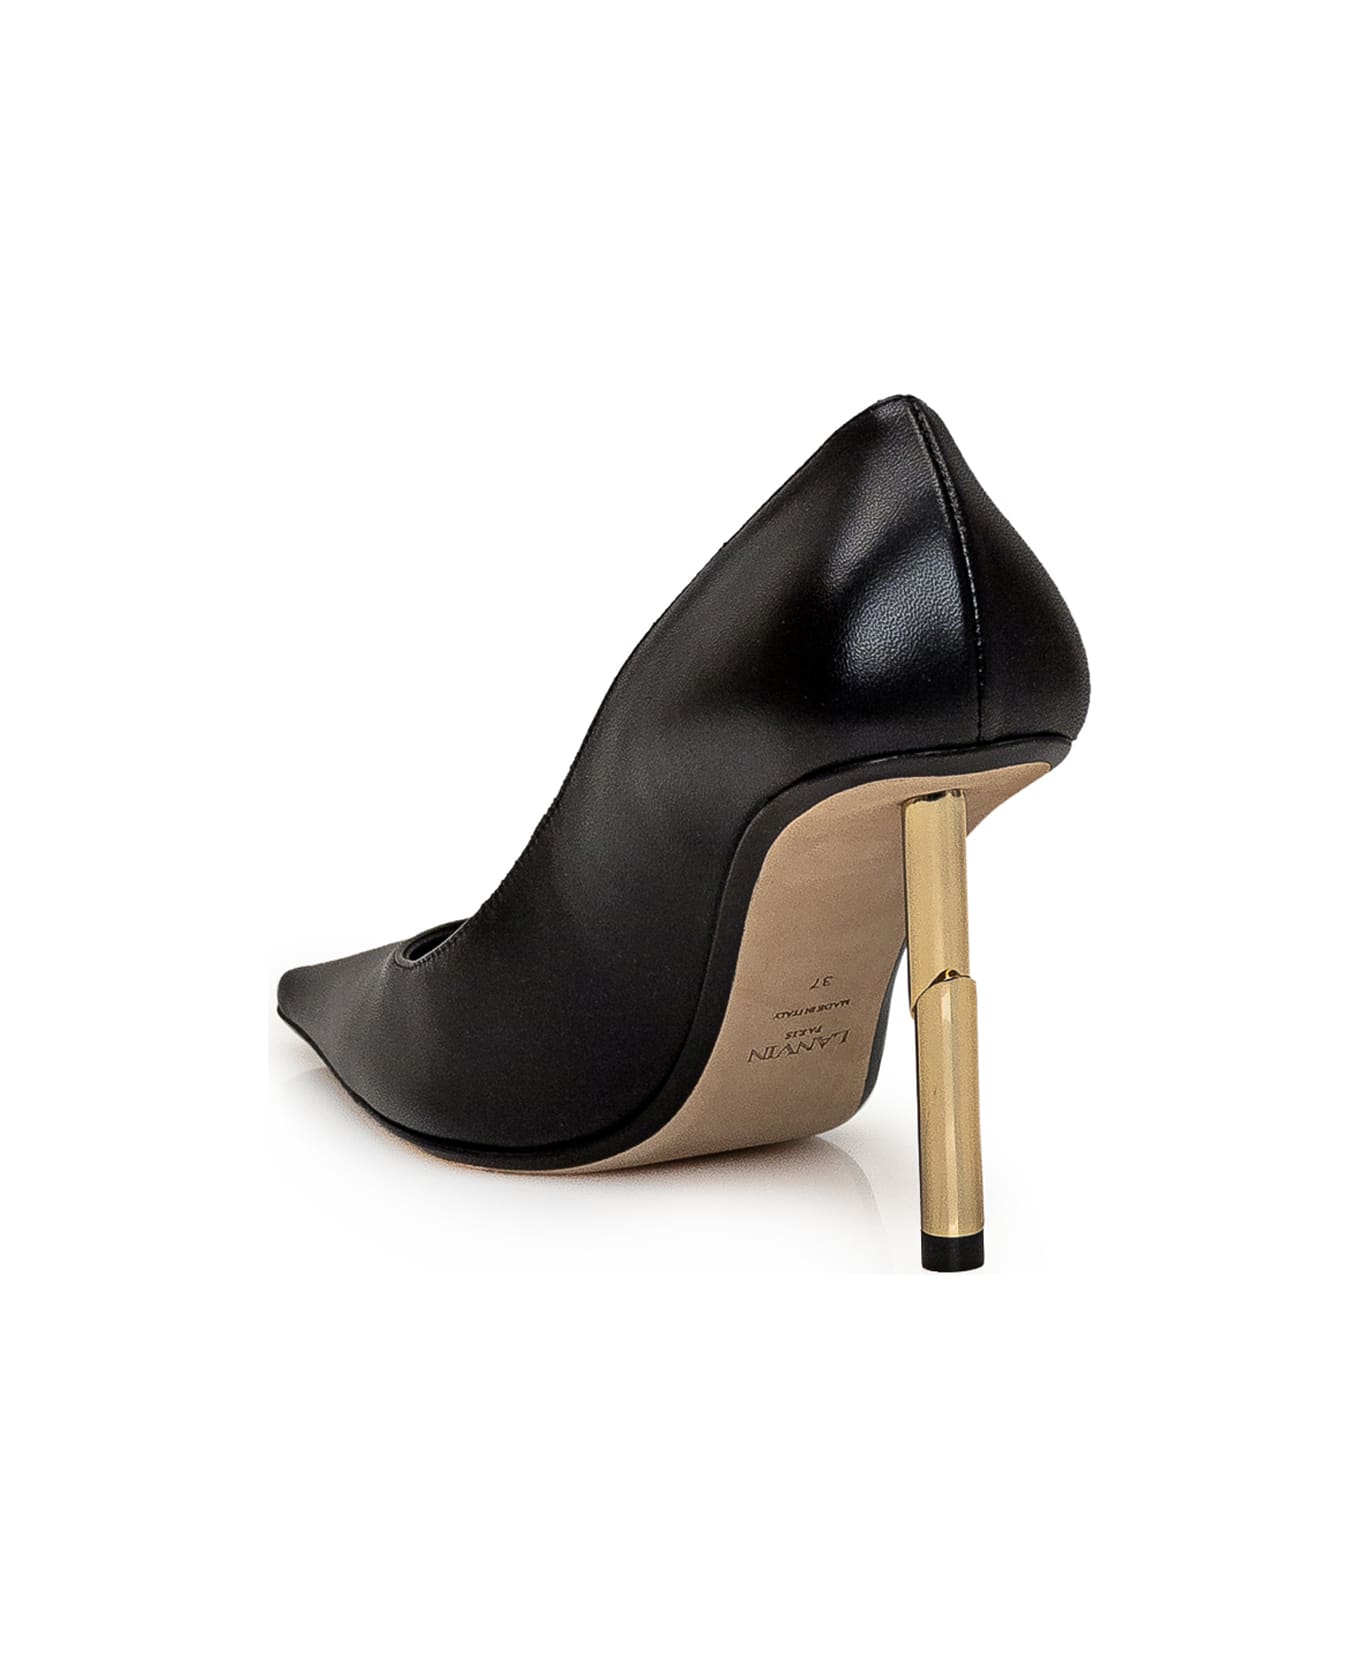 Lanvin Helled Shoe Sequence Pump - BLACK ハイヒール